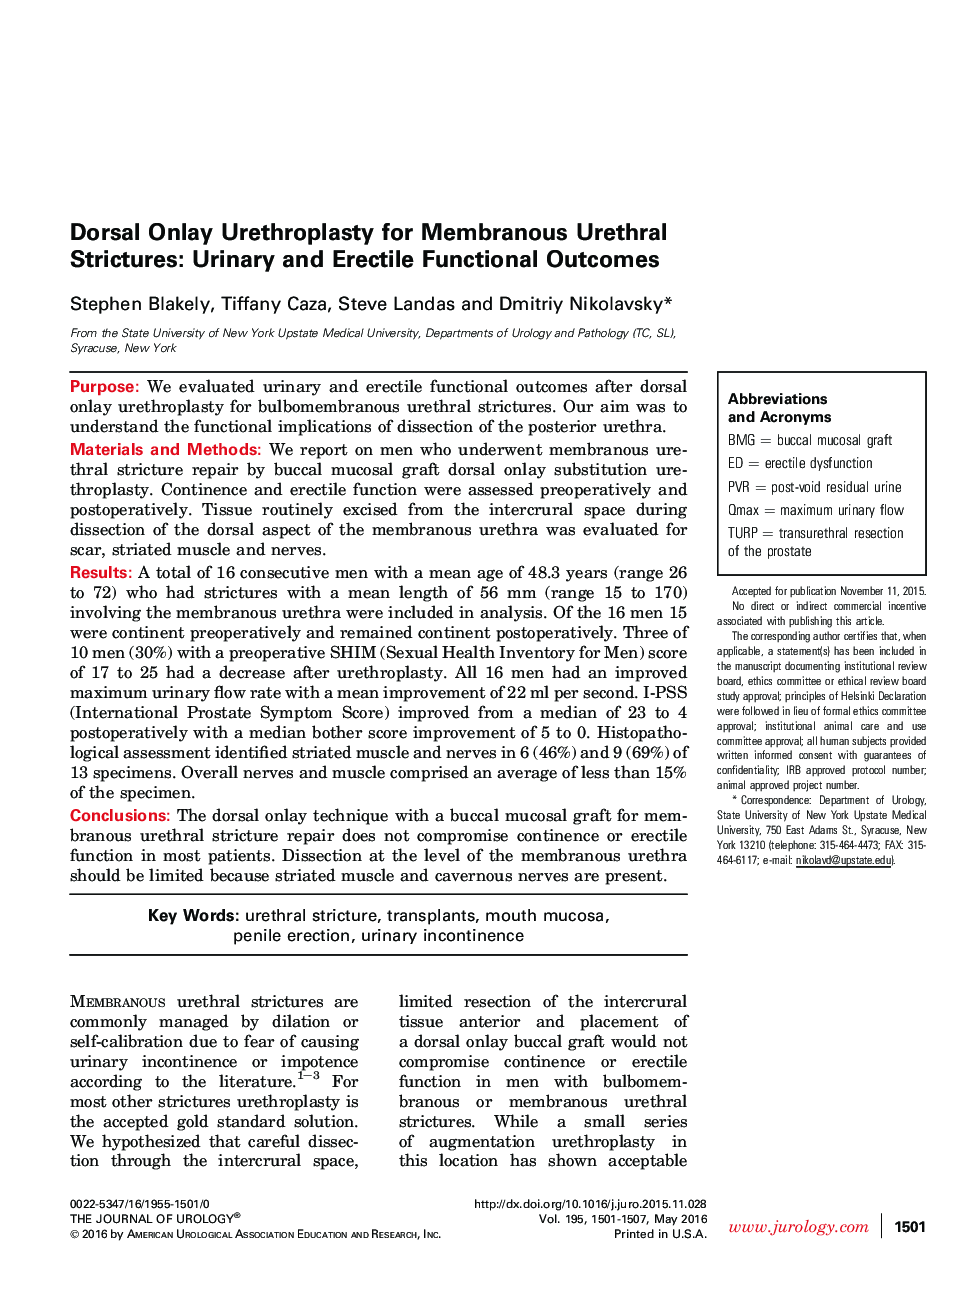 Dorsal Onlay Urethroplasty for Membranous Urethral Strictures: Urinary and Erectile Functional Outcomes 